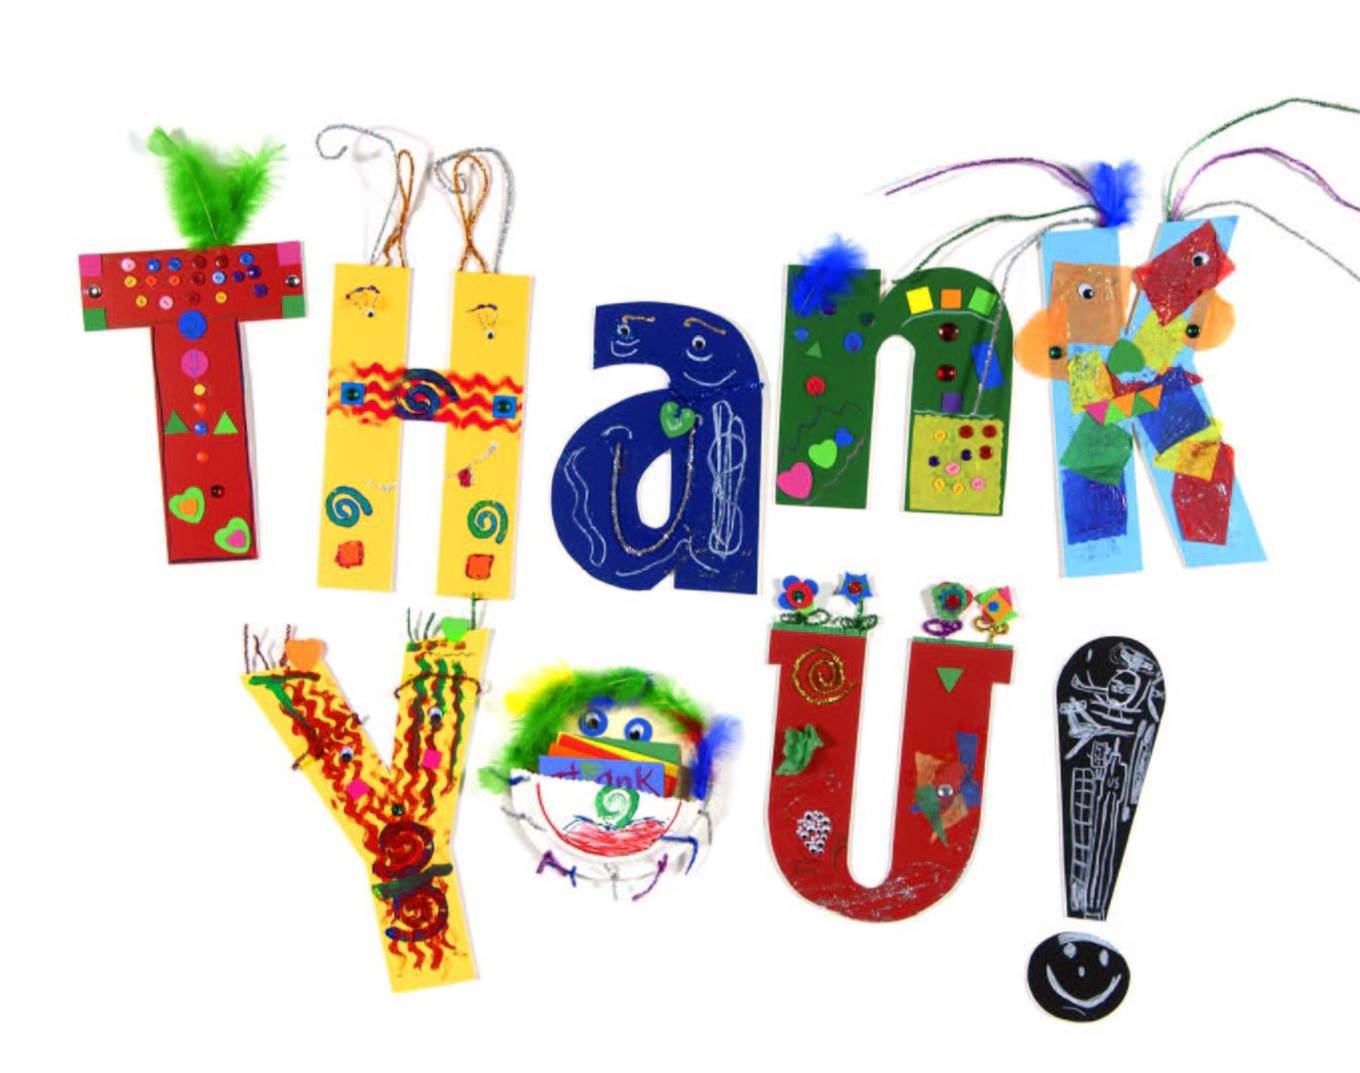 thank you – we truly appreciate everything you do » Orde Day Care and